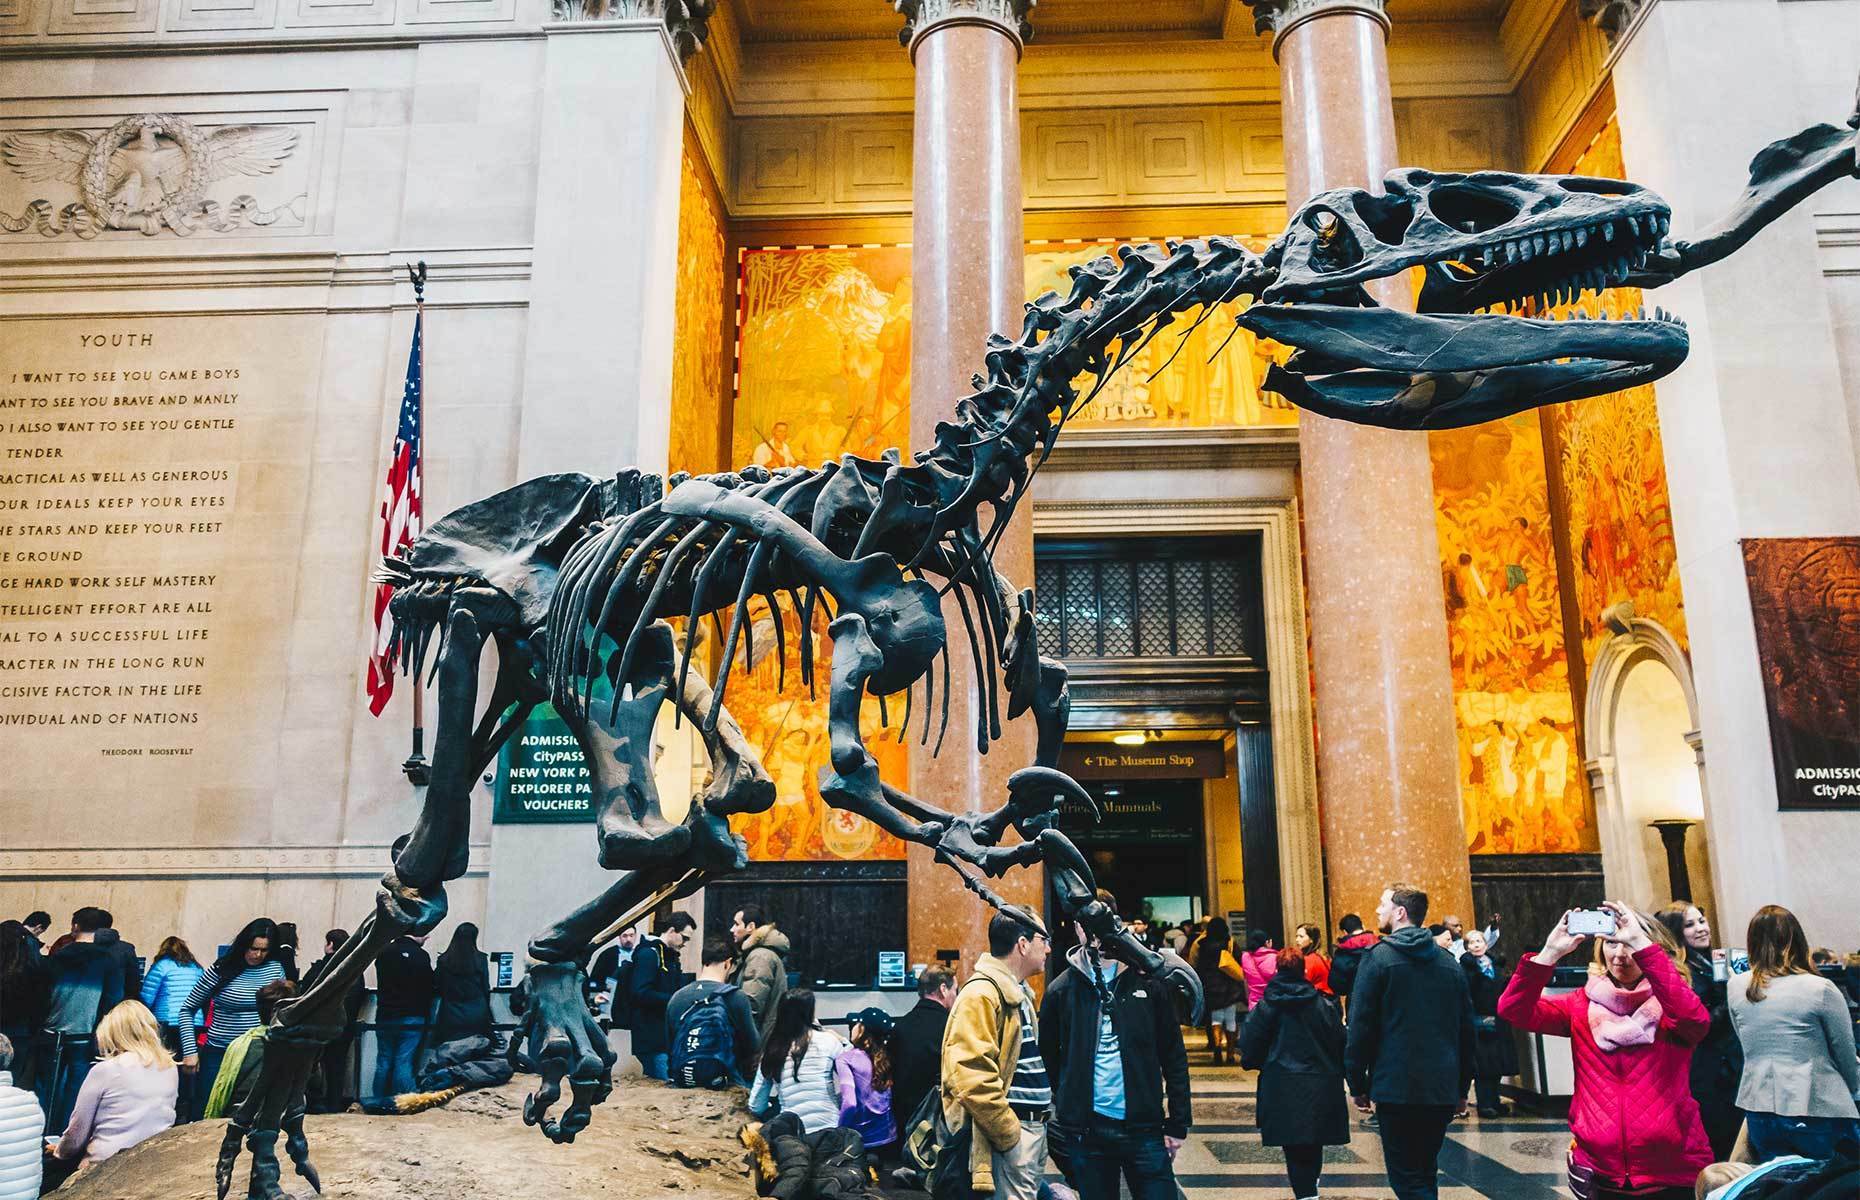 <p class="p1"><span>Curious tourists with a thirst for knowledge will adore a stop at the <a href="https://www.amnh.org/" rel="noreferrer noopener"><span>American Museum of Natural History</span></a>. During your visit, don’t be surprised to find yourself recalling scenes from <a href="https://www.imdb.com/title/tt0477347/" rel="noreferrer noopener"><span><em>Night at the Museum</em></span></a>, a movie filmed on the premises.</span></p>